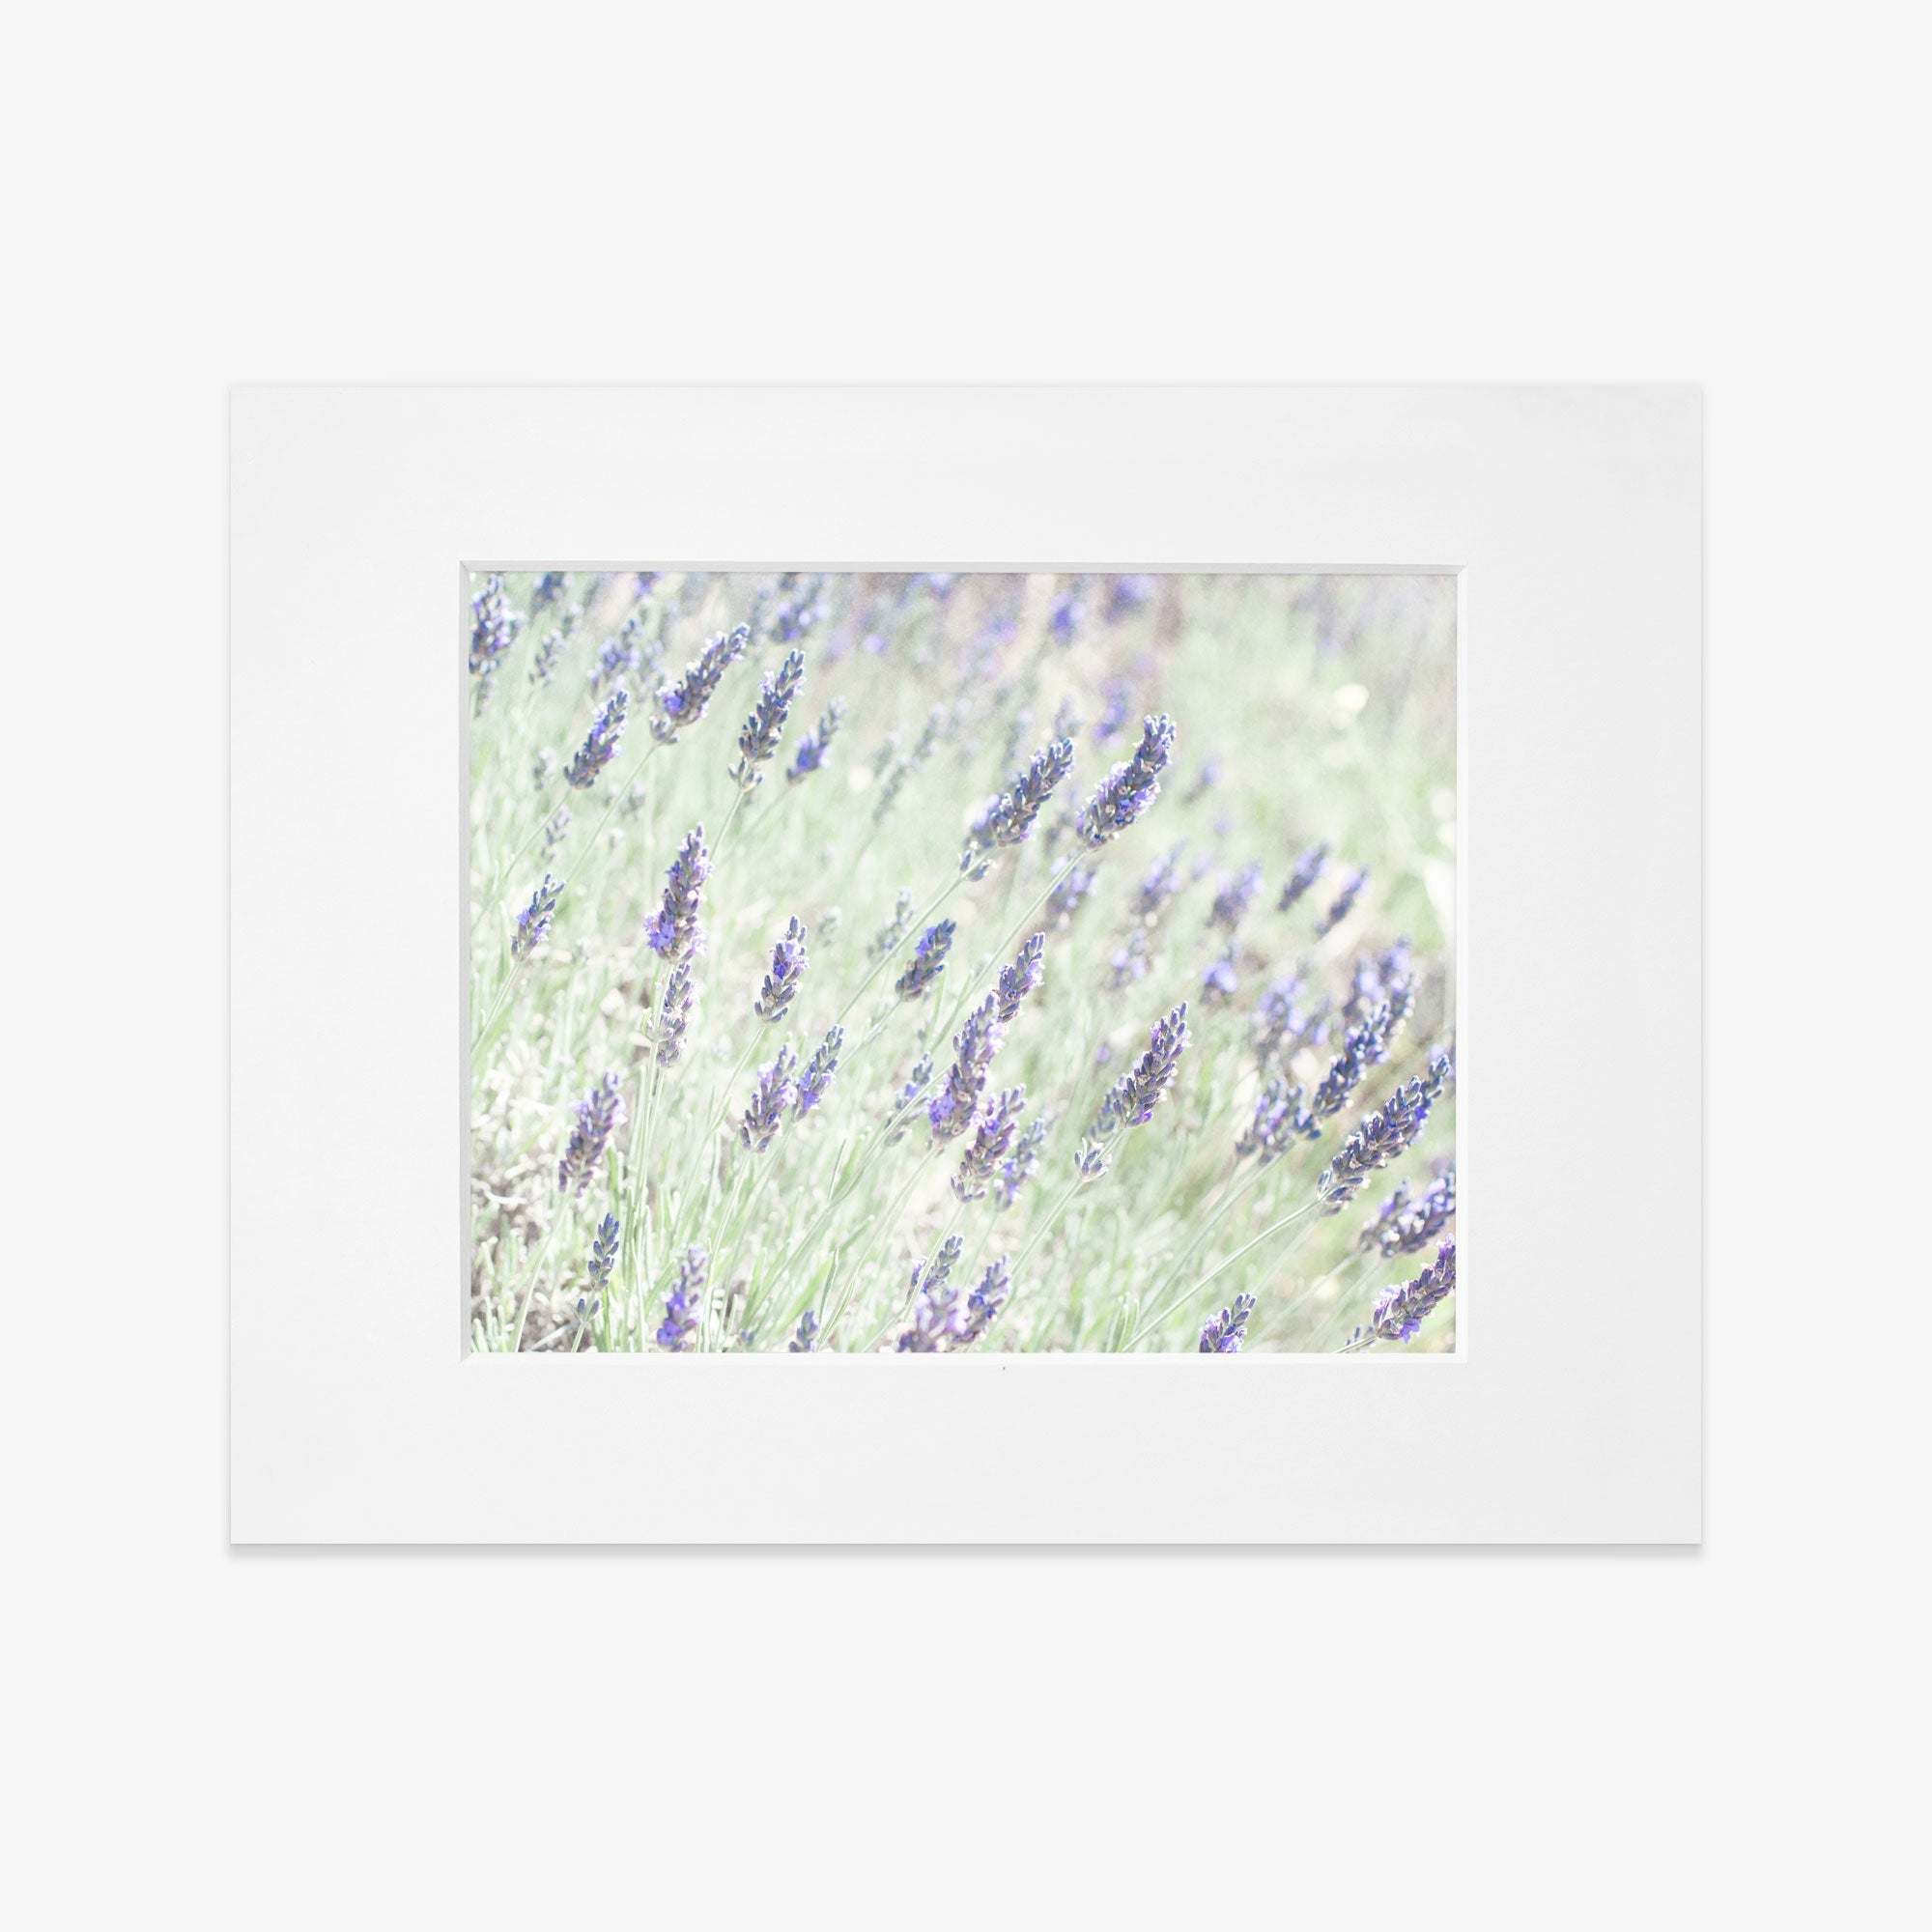 A framed photograph of a Floral Purple Print, &#39;Lavender for LaLa&#39;, with the flowers in focus displaying various shades of purple against a soft, blurred green background, printed on archival photographic paper by Offley Green.